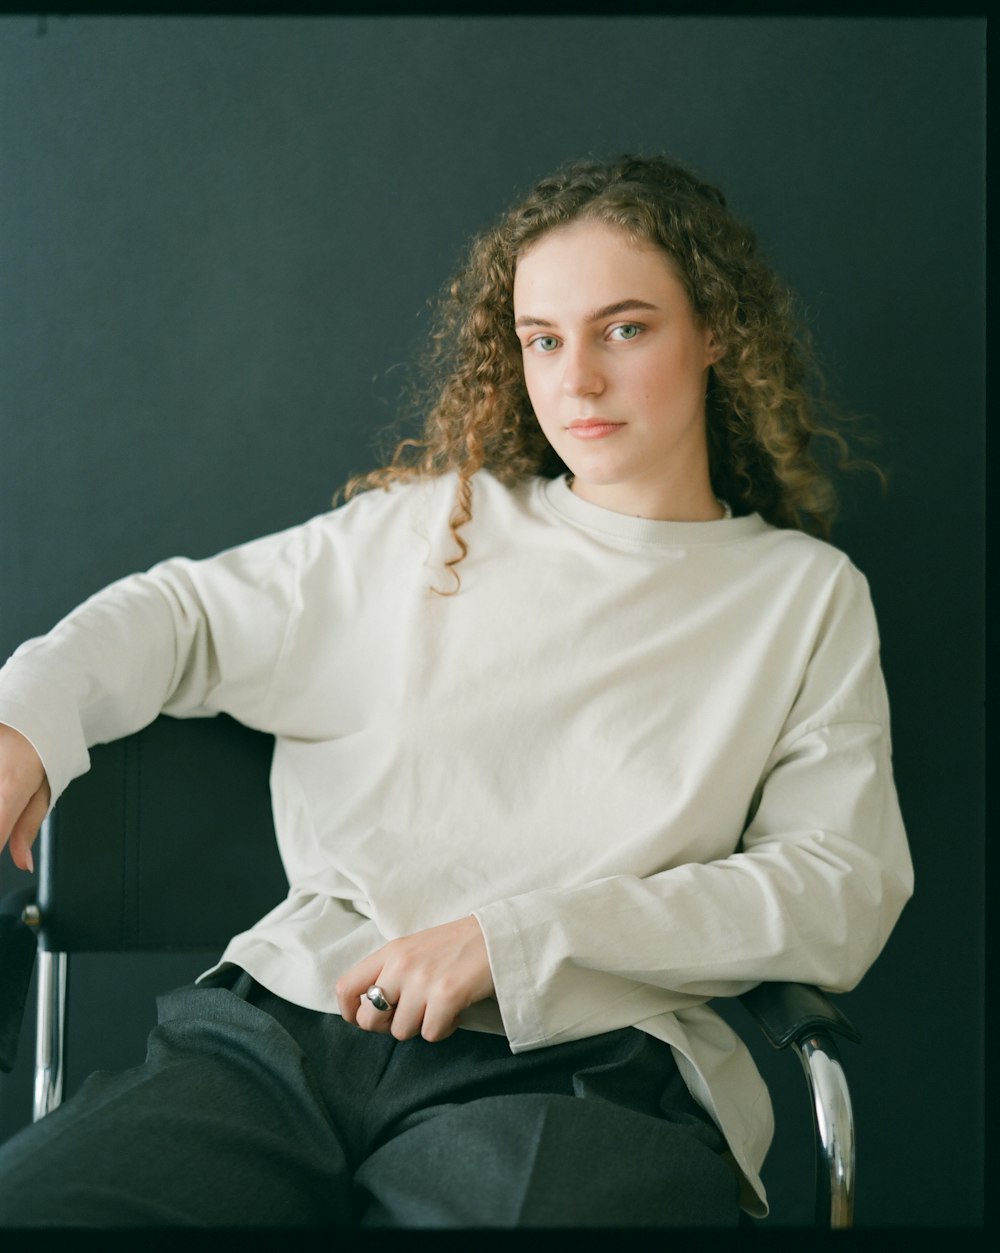 a woman sitting in a chair wearing a white shirt